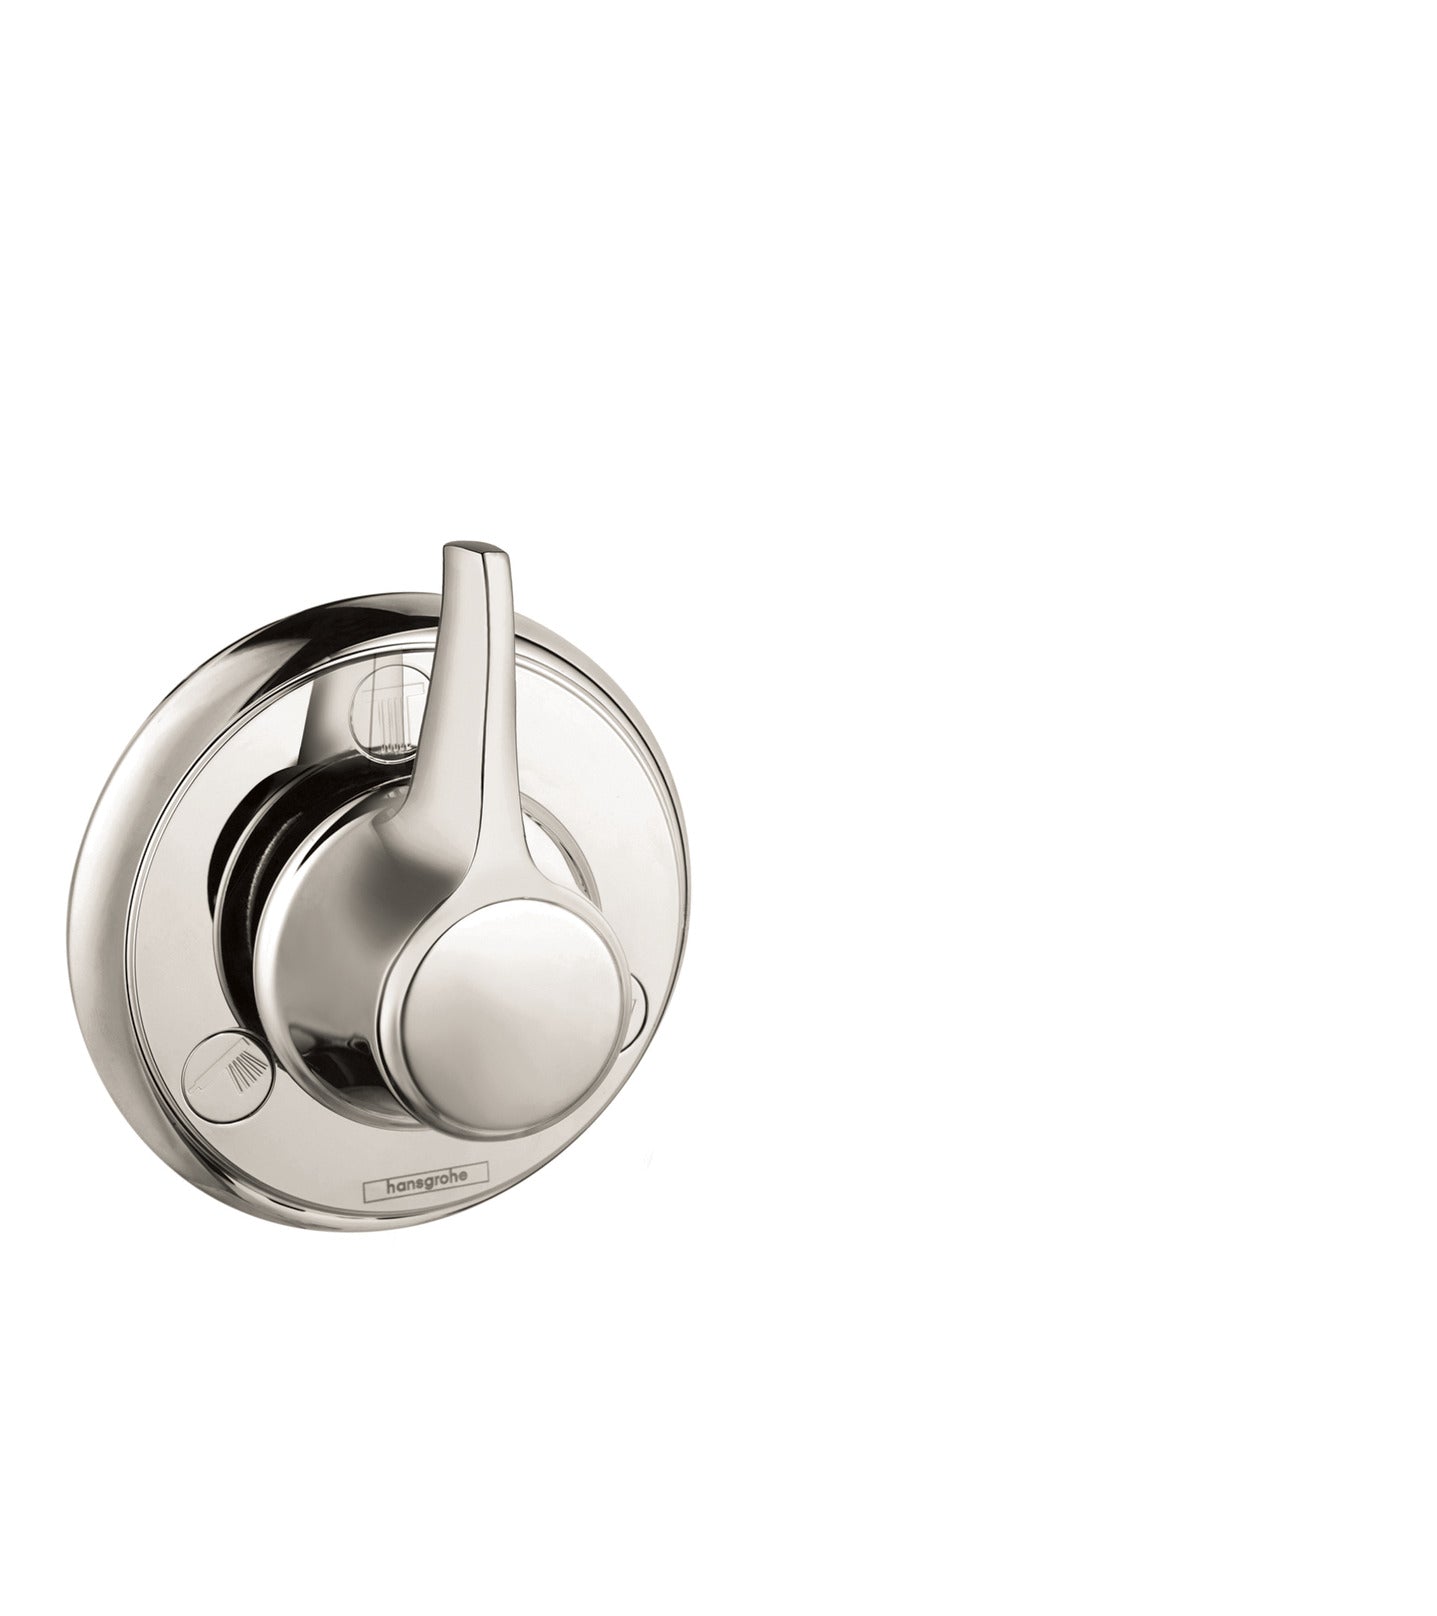 HANSGROHE 15934831 Polished Nickel Ecostat Classic Classic Diverter Trim